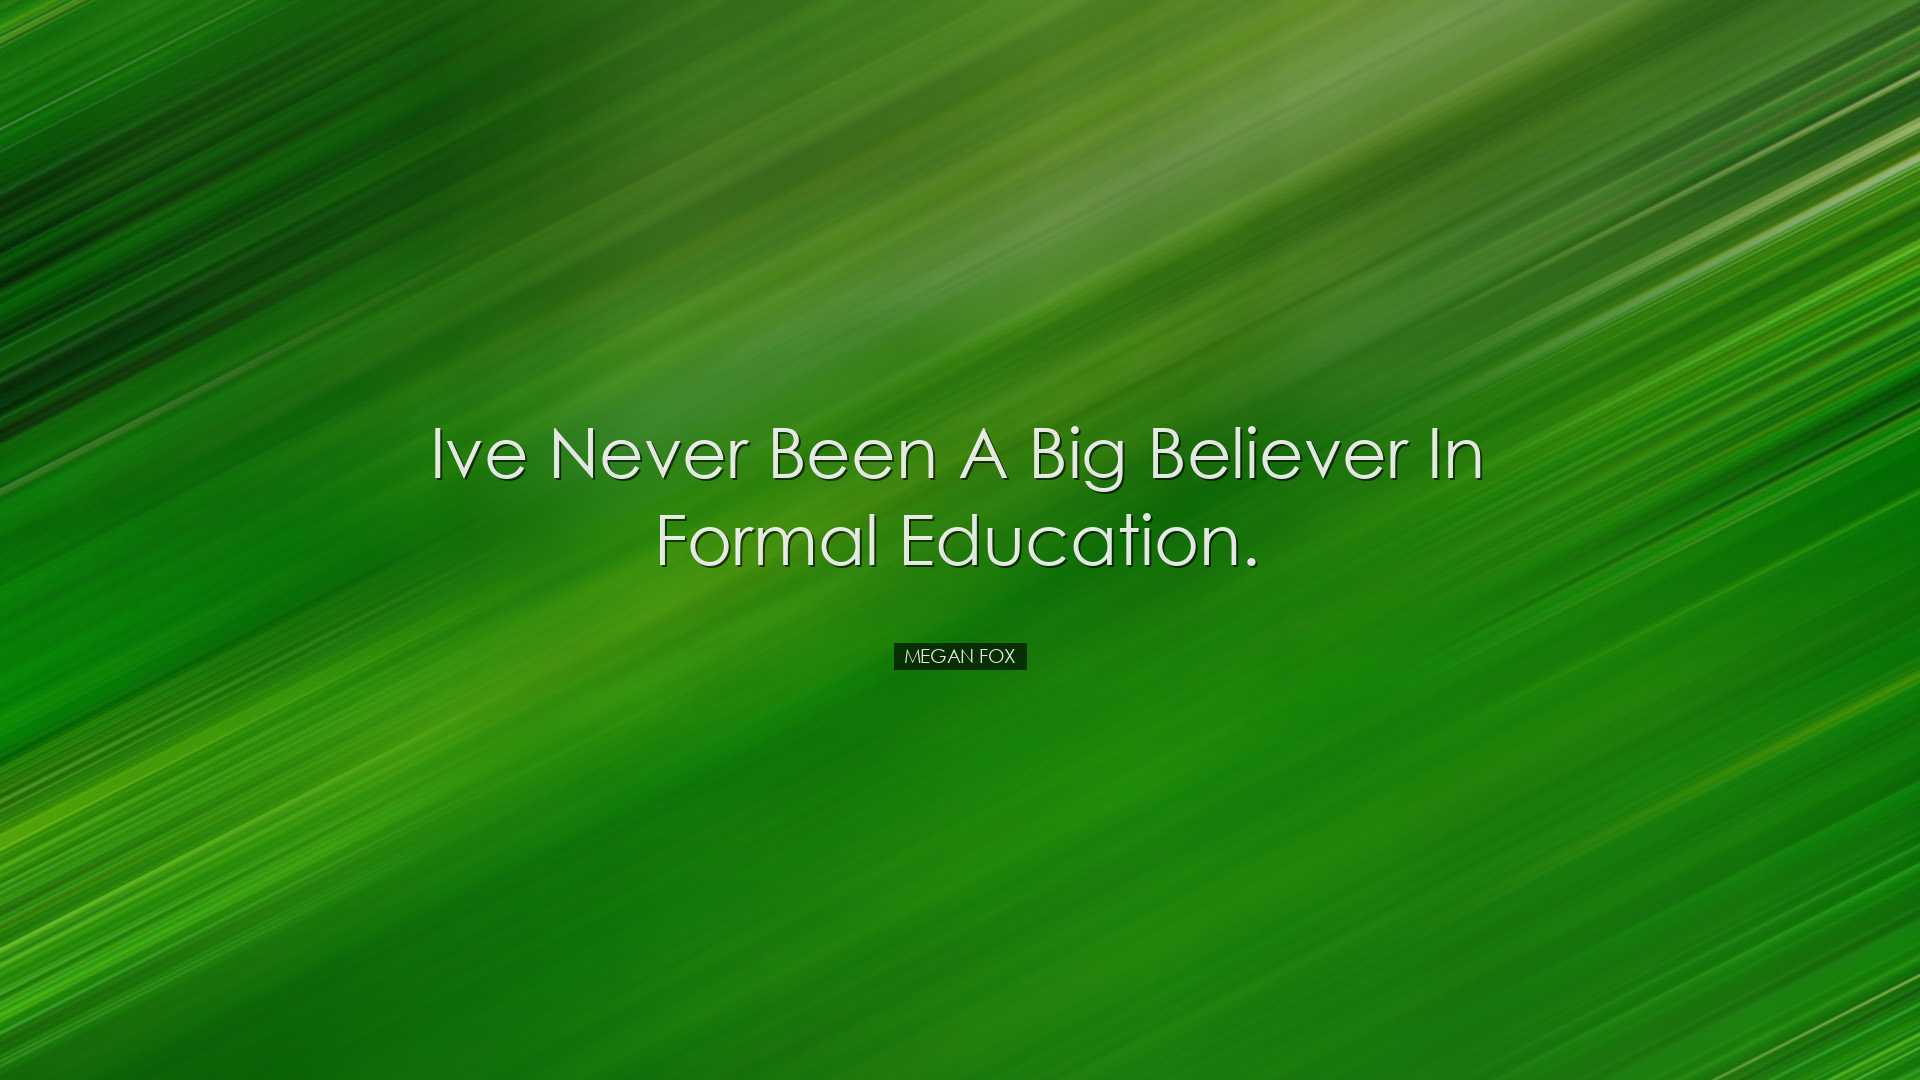 Ive never been a big believer in formal education. - Megan Fox